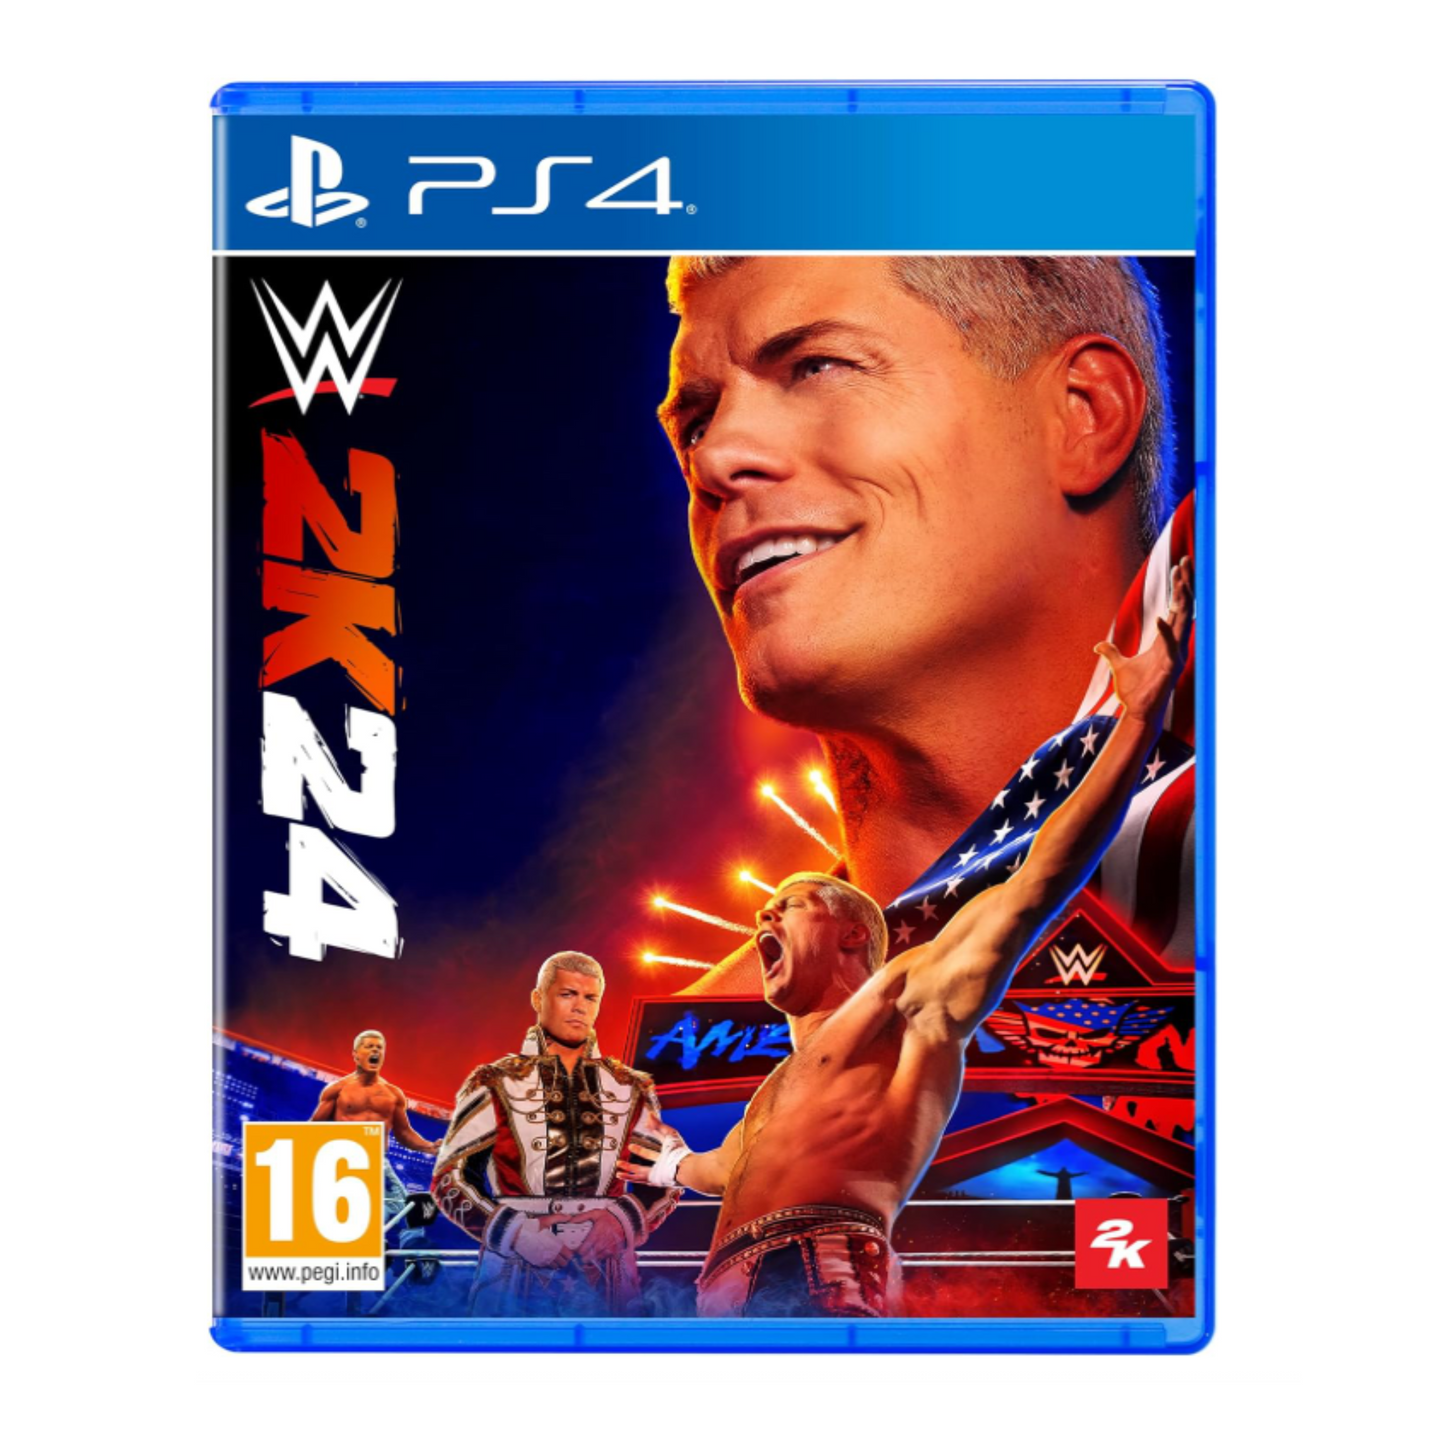 WWE 2K24 Video Game for Playstation 4